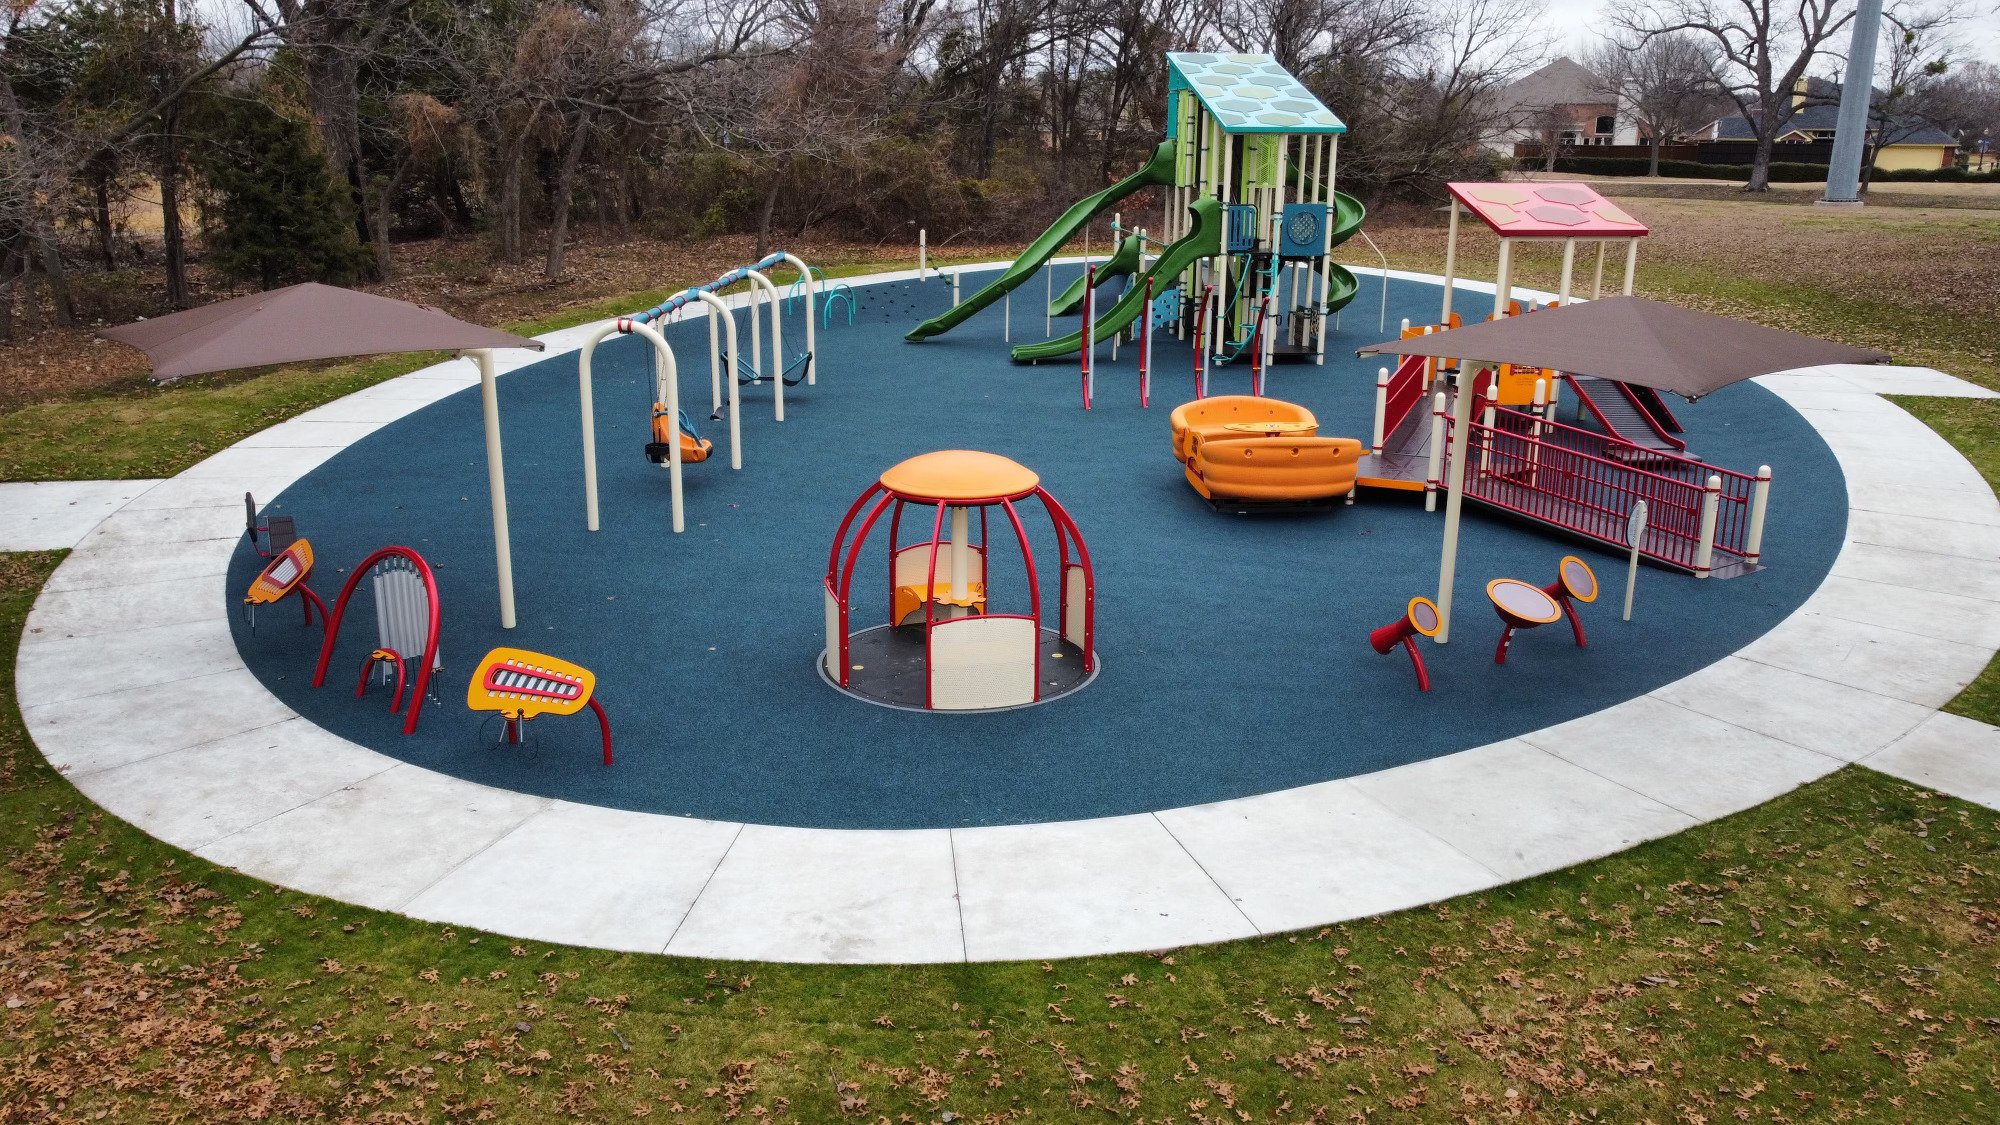 Breckinridge Park, Richardson's newest addition, exemplifies inclusive playgrounds. Designed with diverse self-directed elements, it serves the entire community.